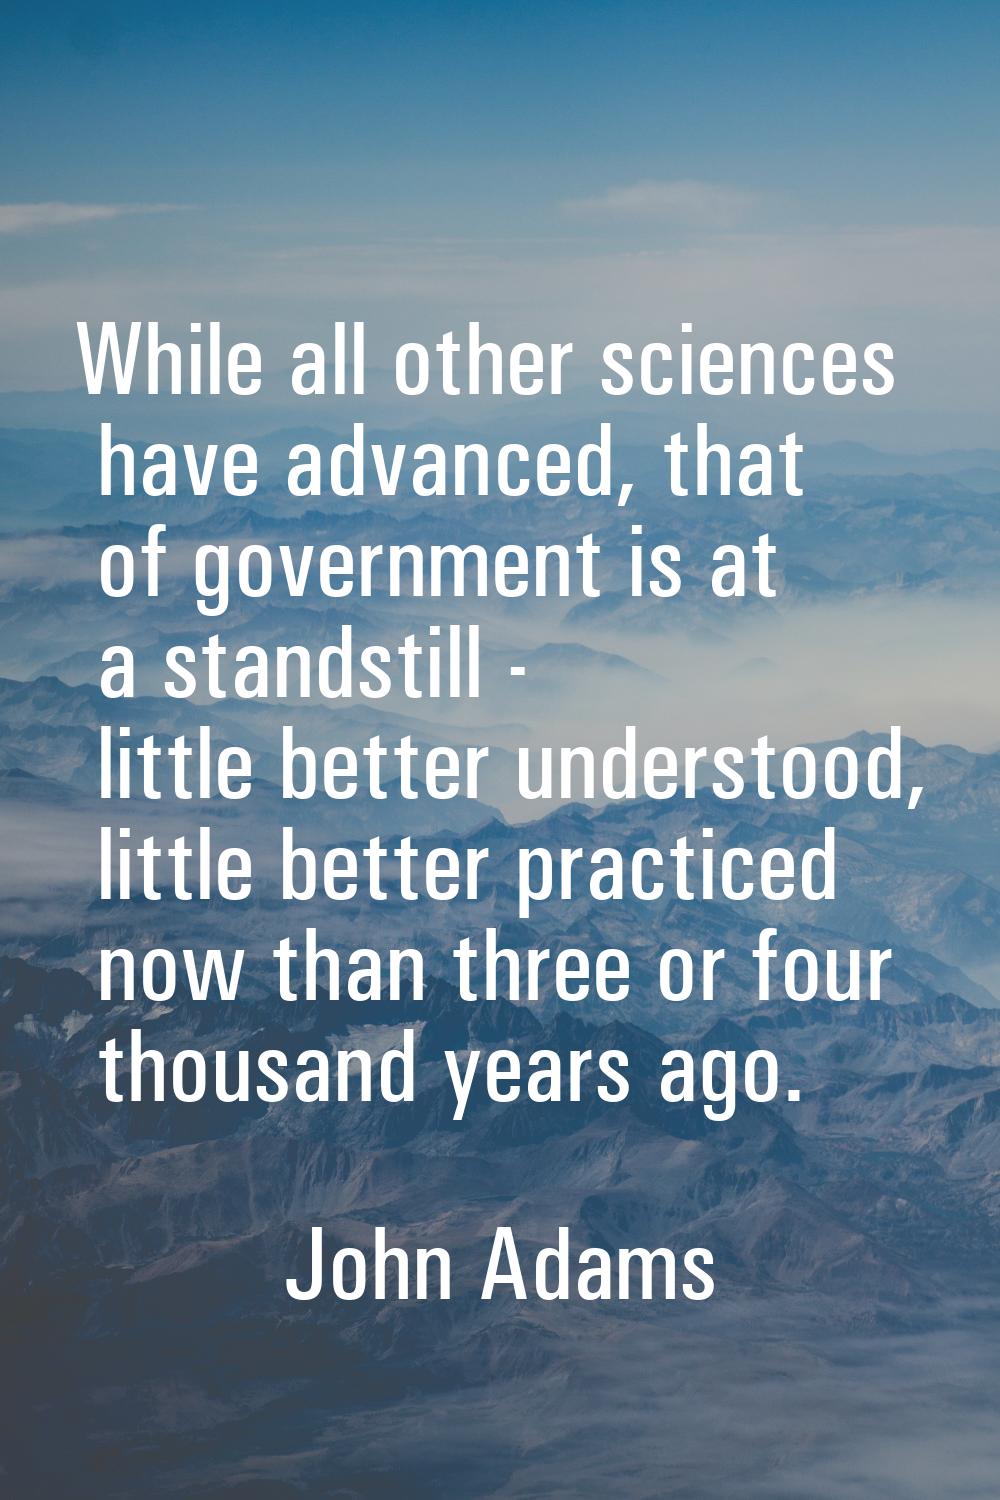 While all other sciences have advanced, that of government is at a standstill - little better under